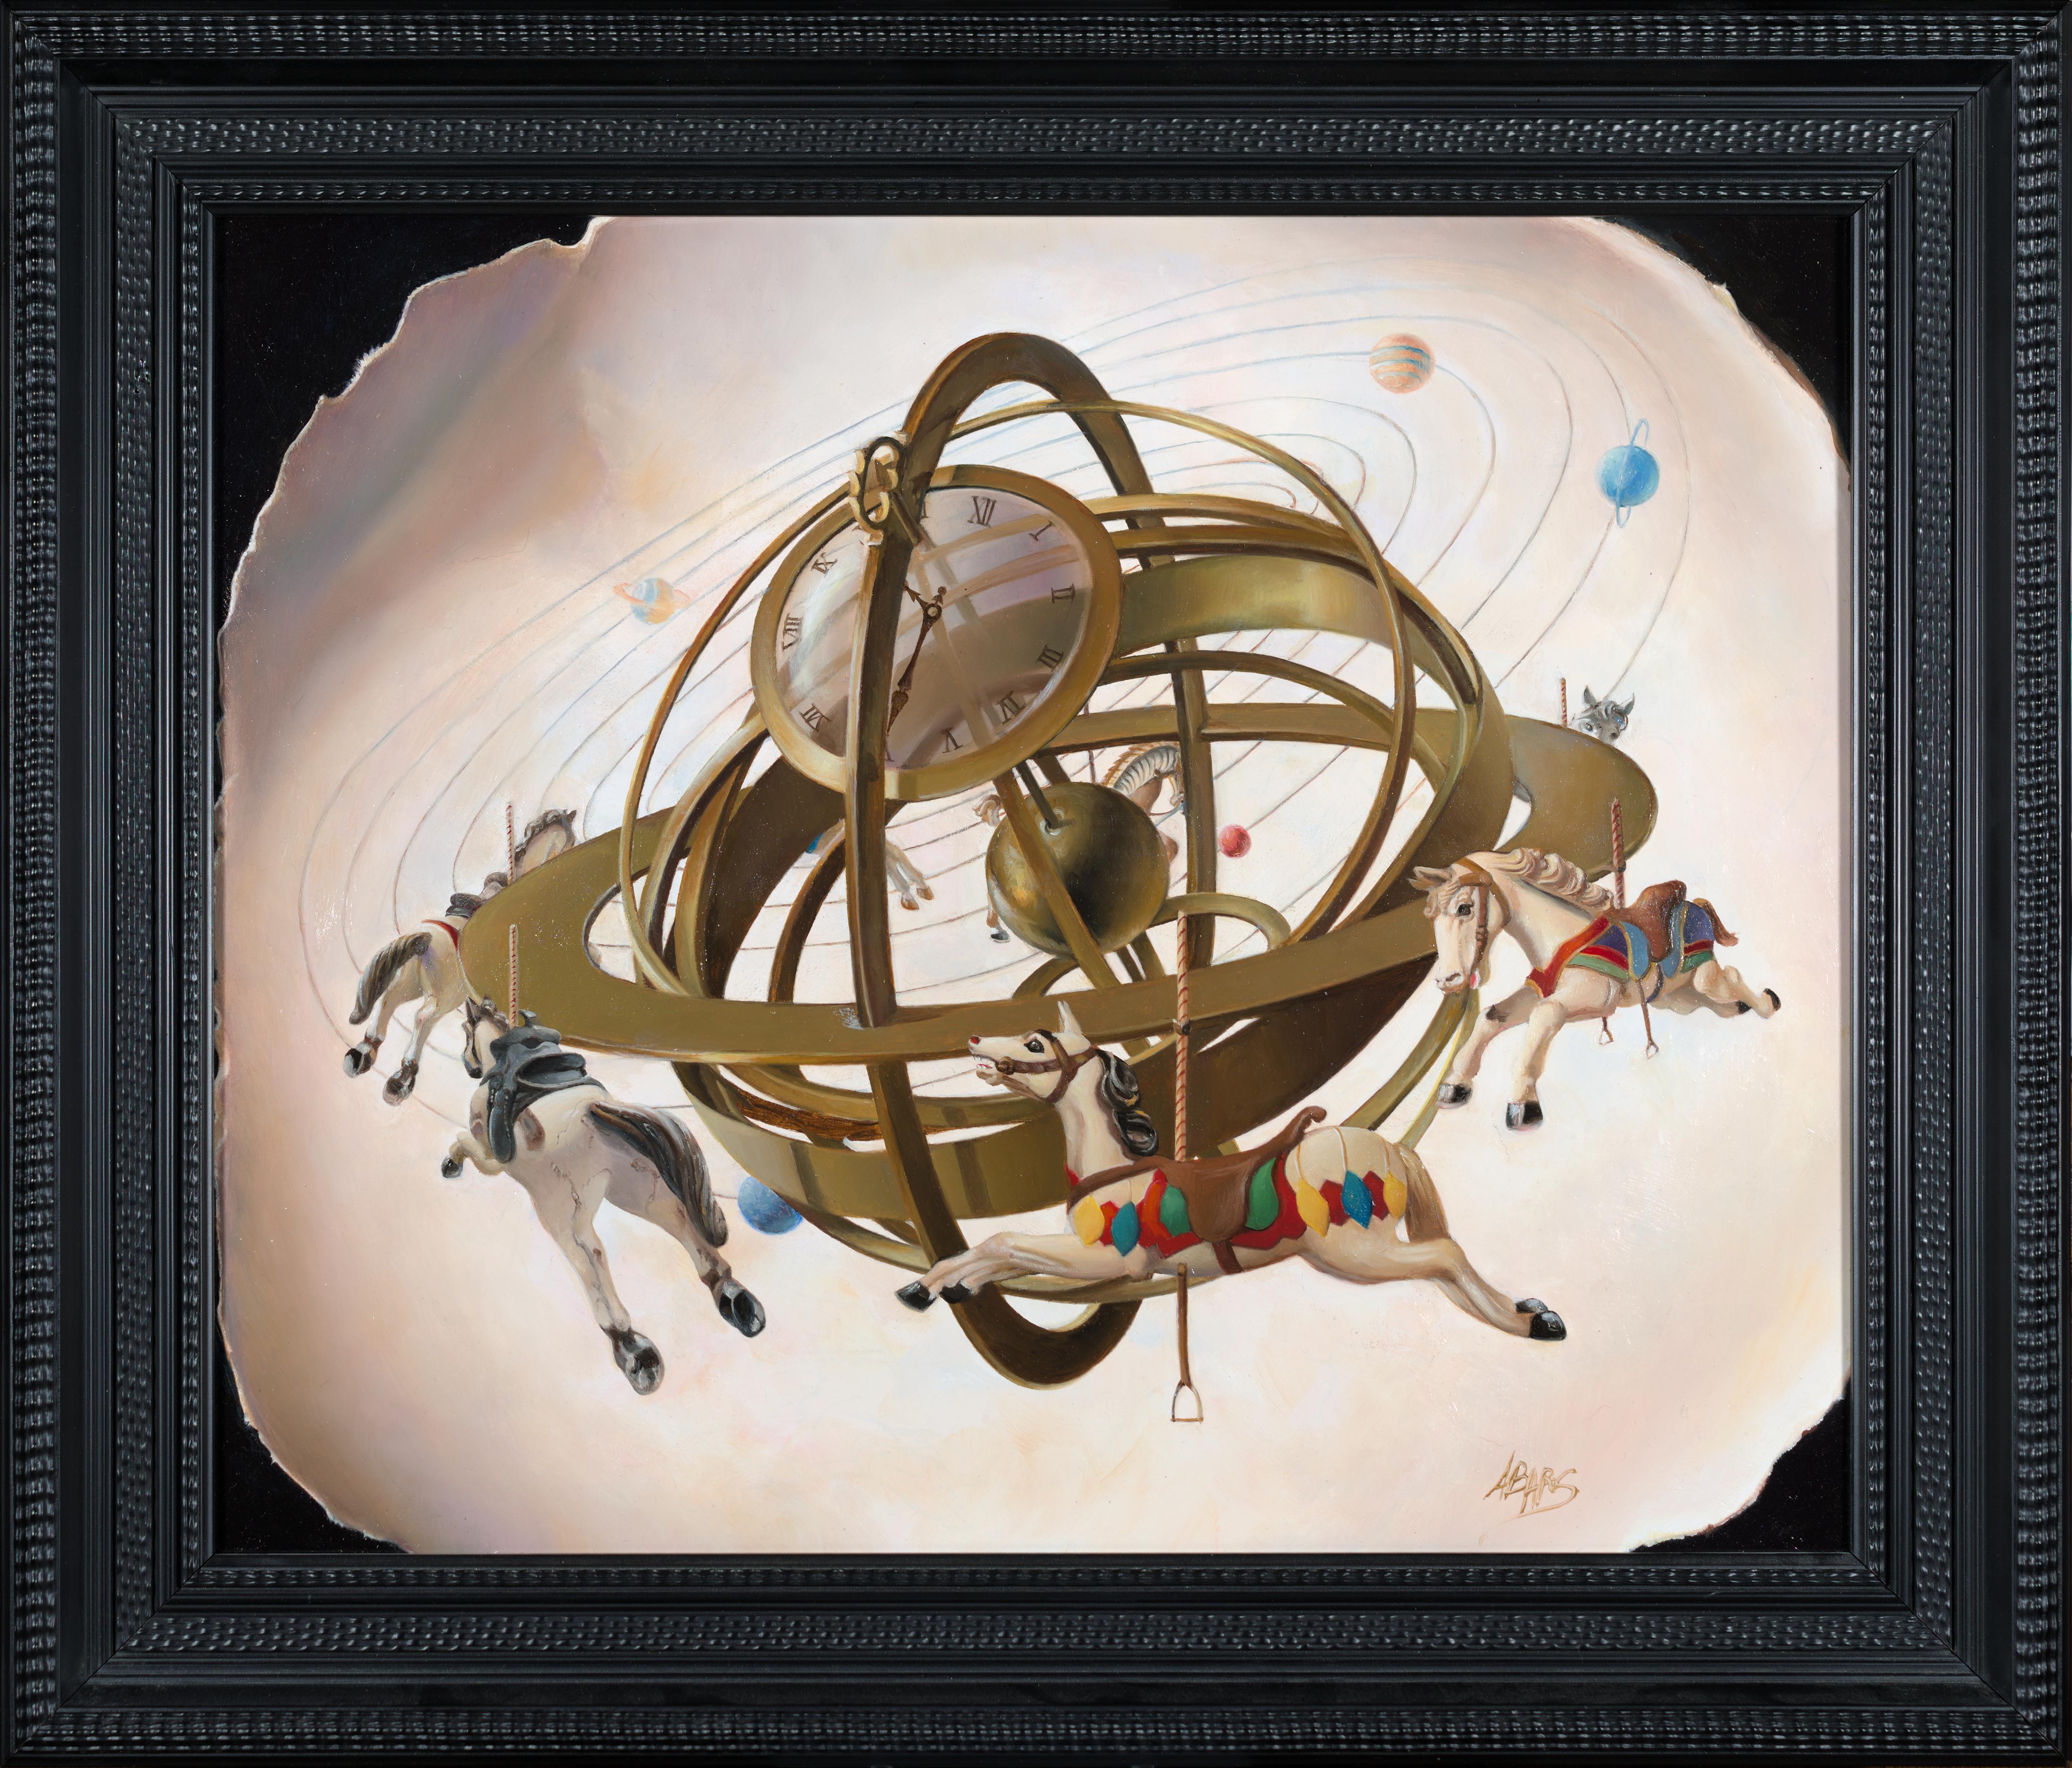 Andrée Bars Still-Life Painting – Merry-Go-Round, Karussell Astrolabe Univers&Humanity Symbolistisches Ölgemälde